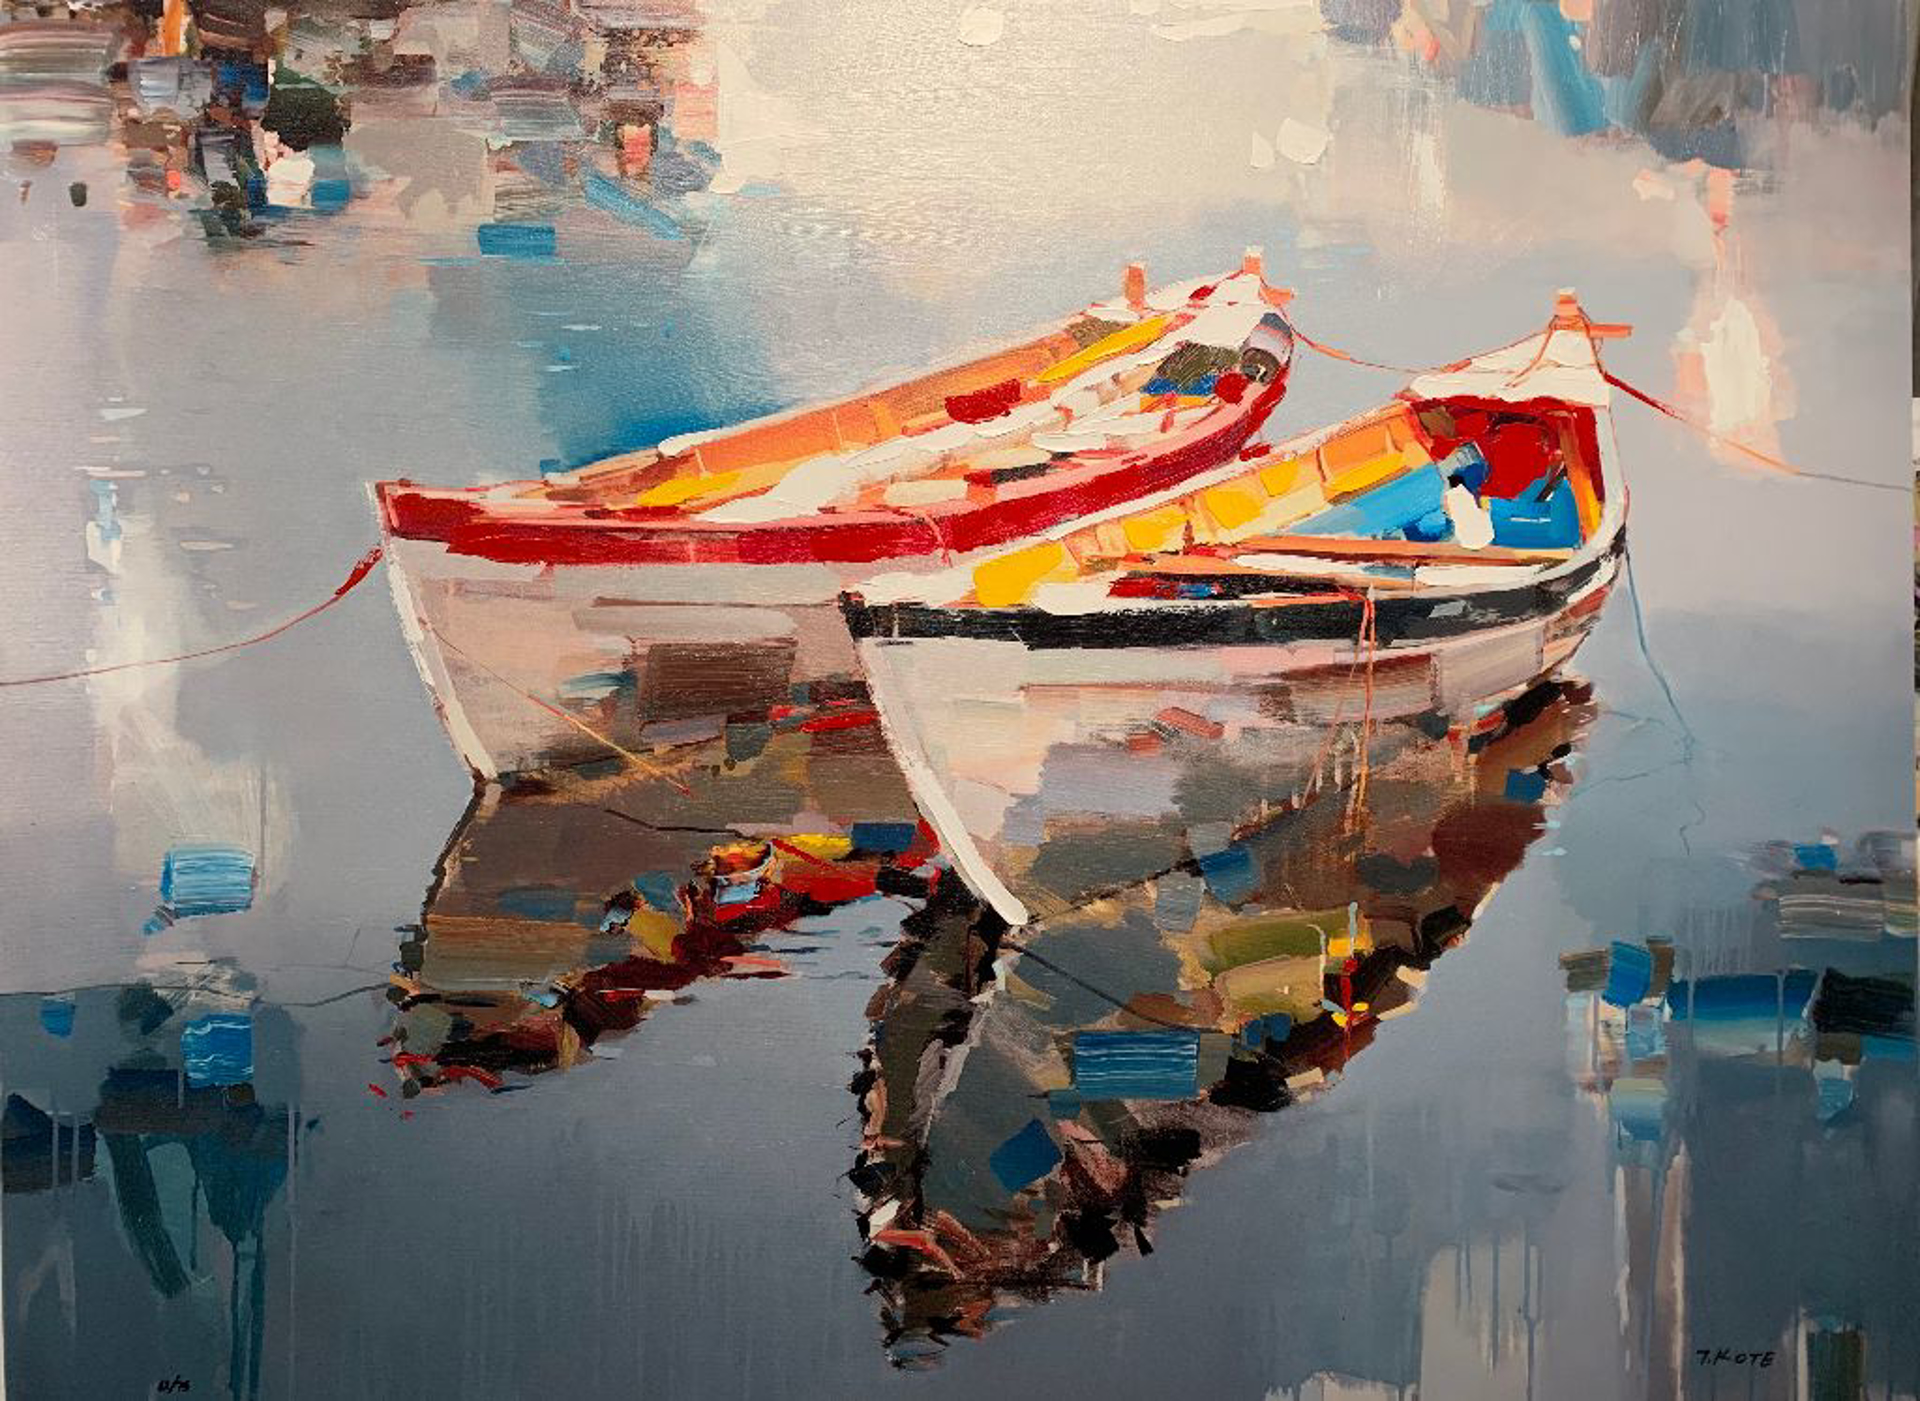 Enchanted Place by Josef Kote